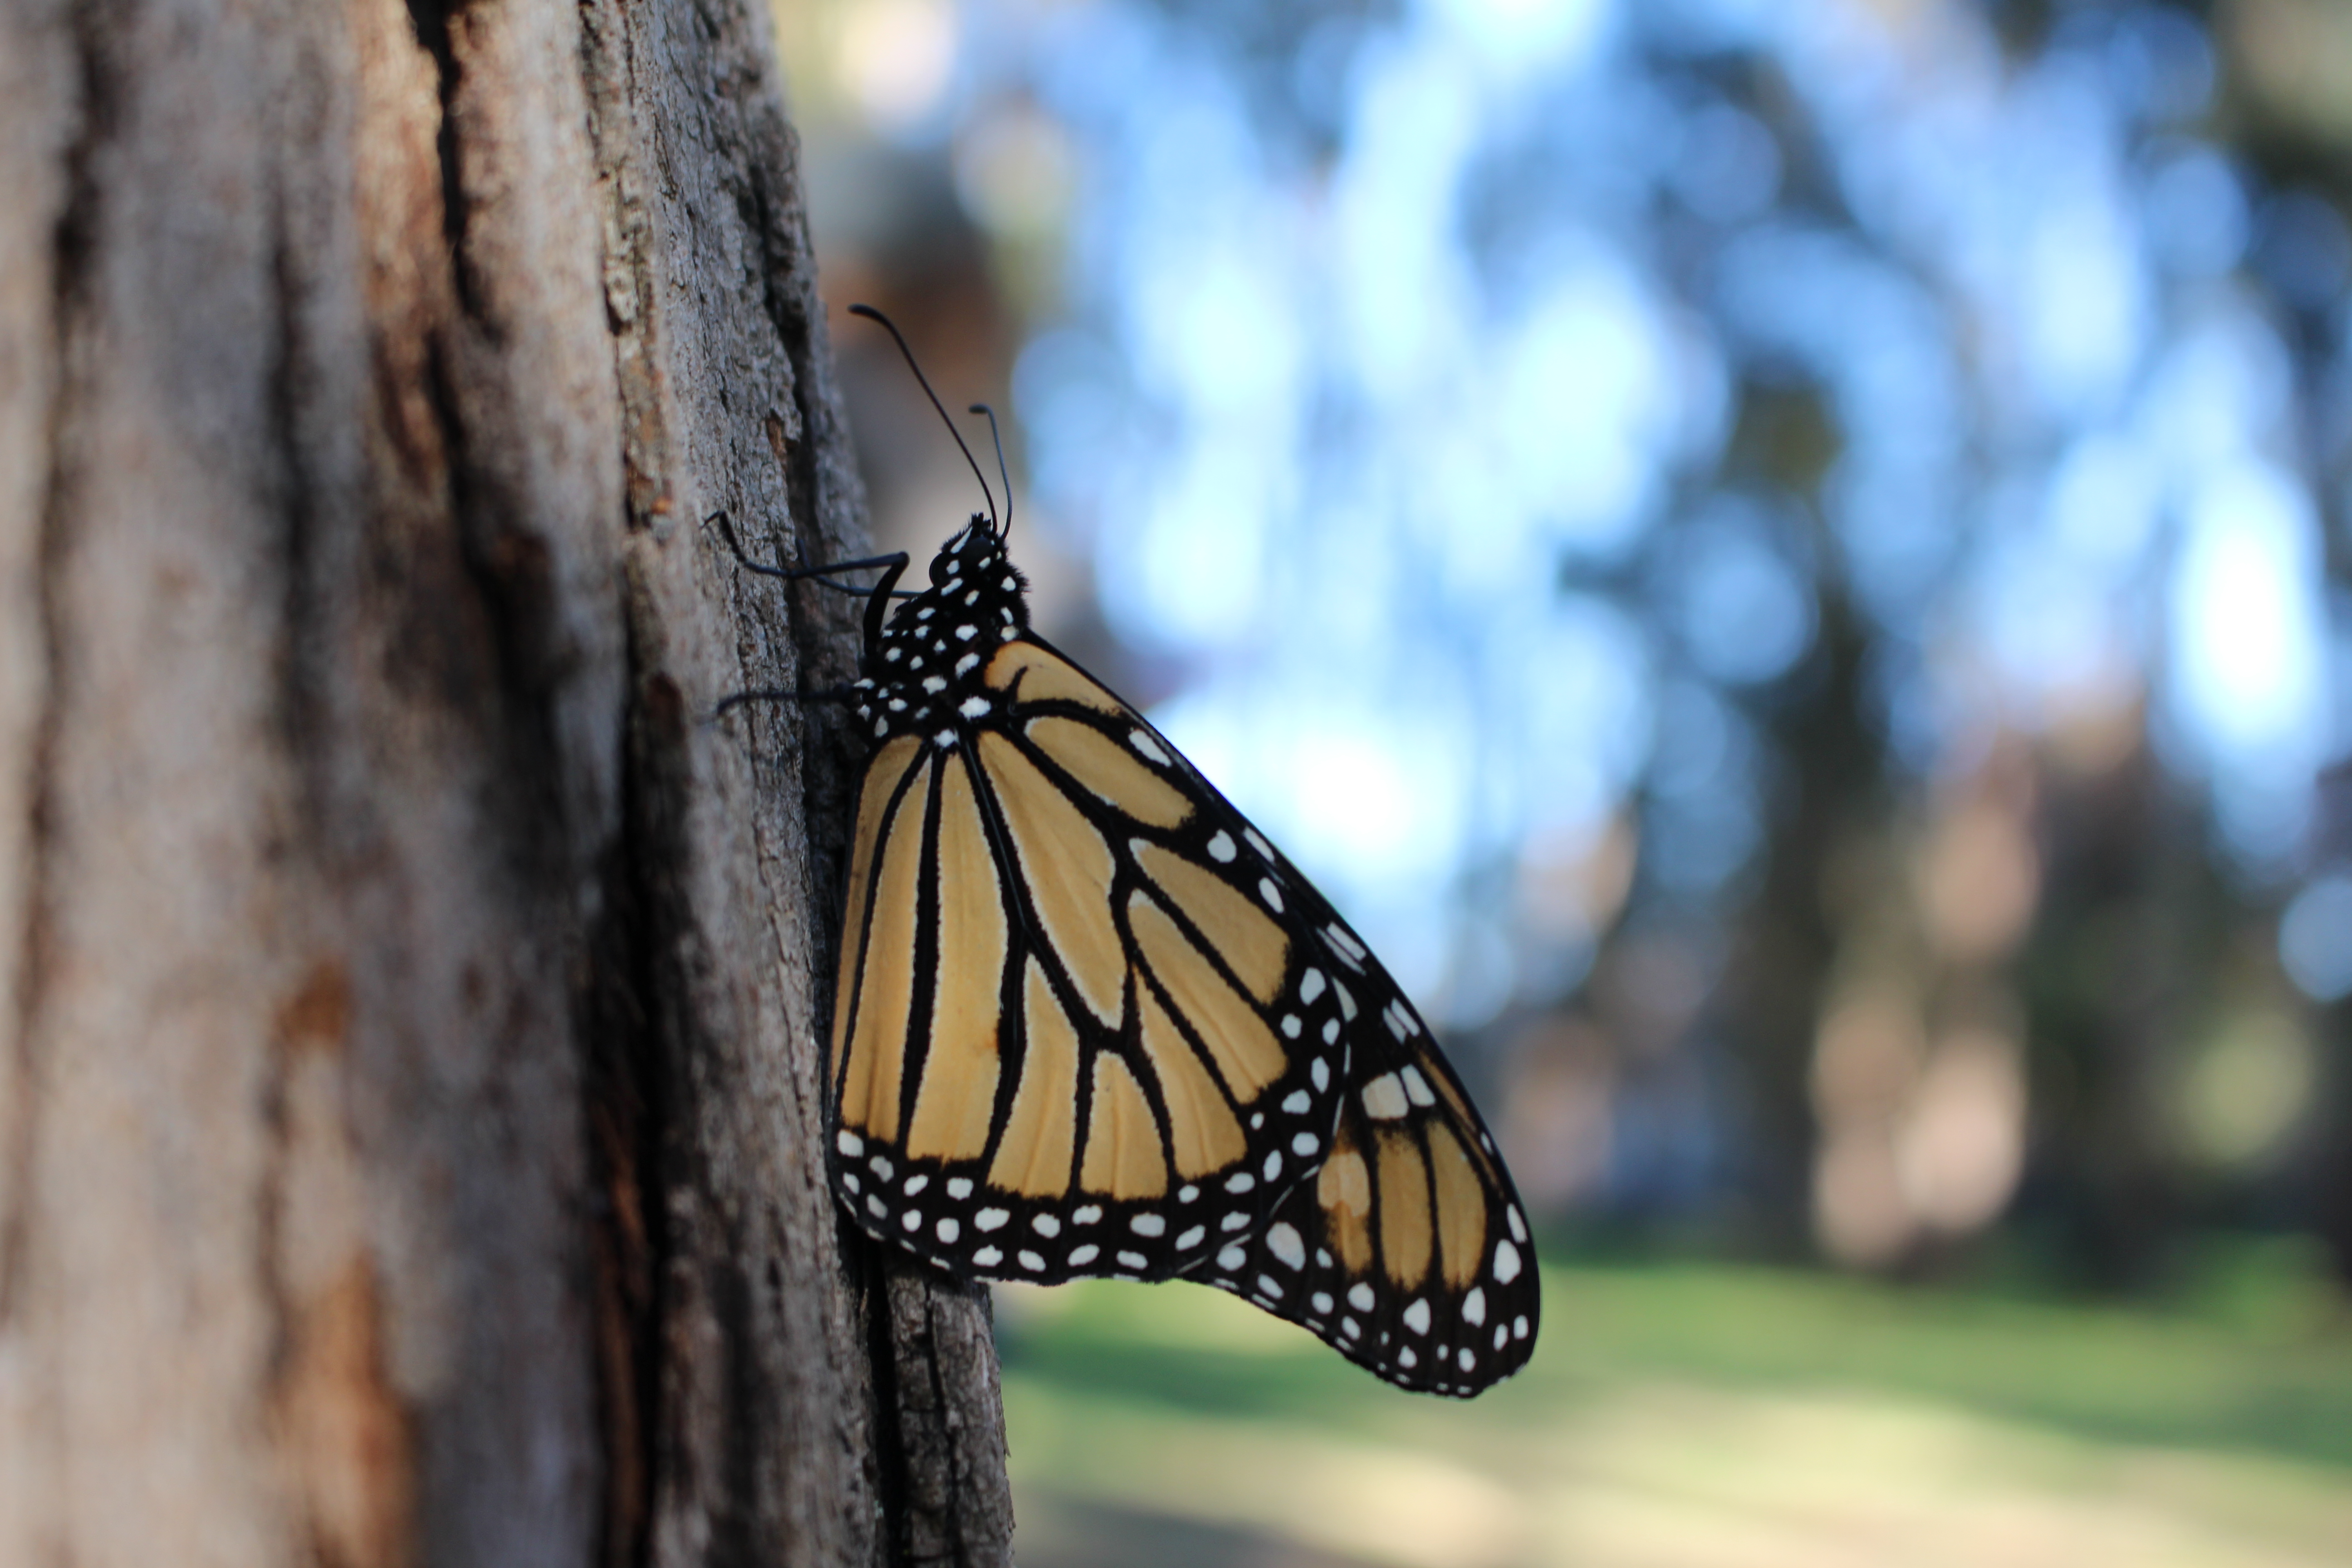 A monarch with folded wings perches on a tree trunk. The photo's colors are subdued, creating a slightly gloomy mood.